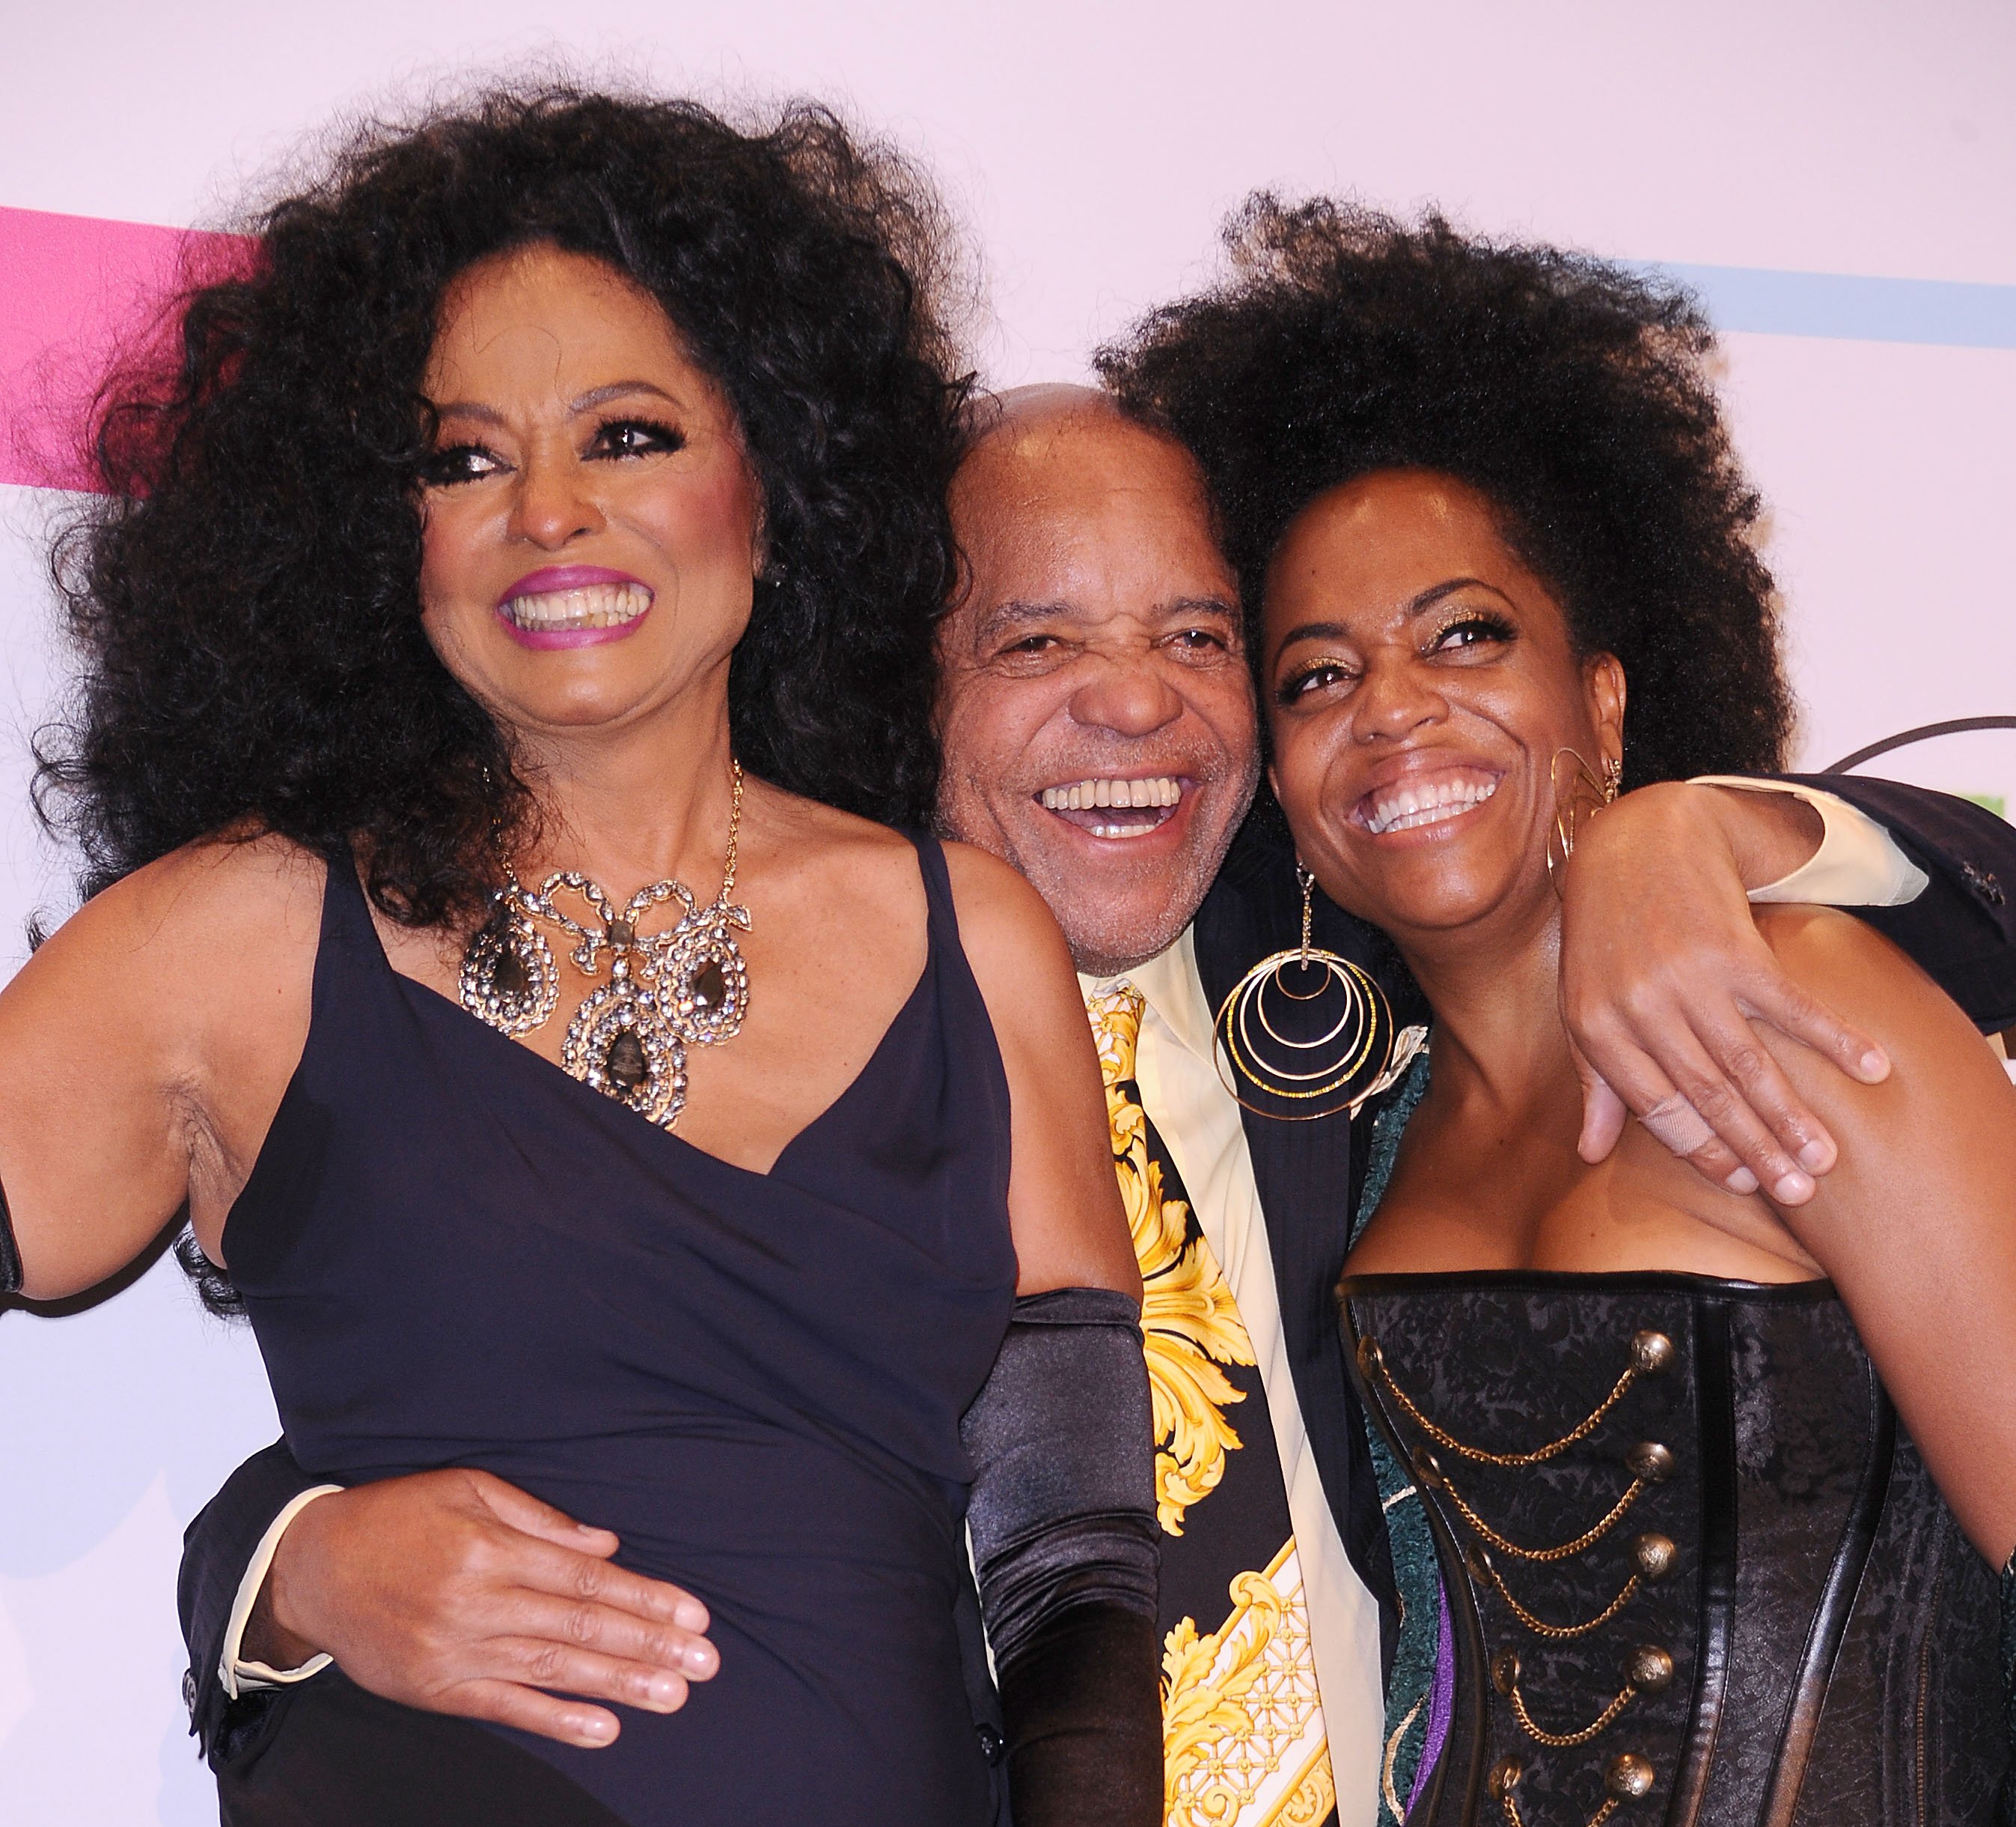 (L-R): Diana Ross, Berry Gordy, and Rhonda Ross Kendrick smiling at a premiere.